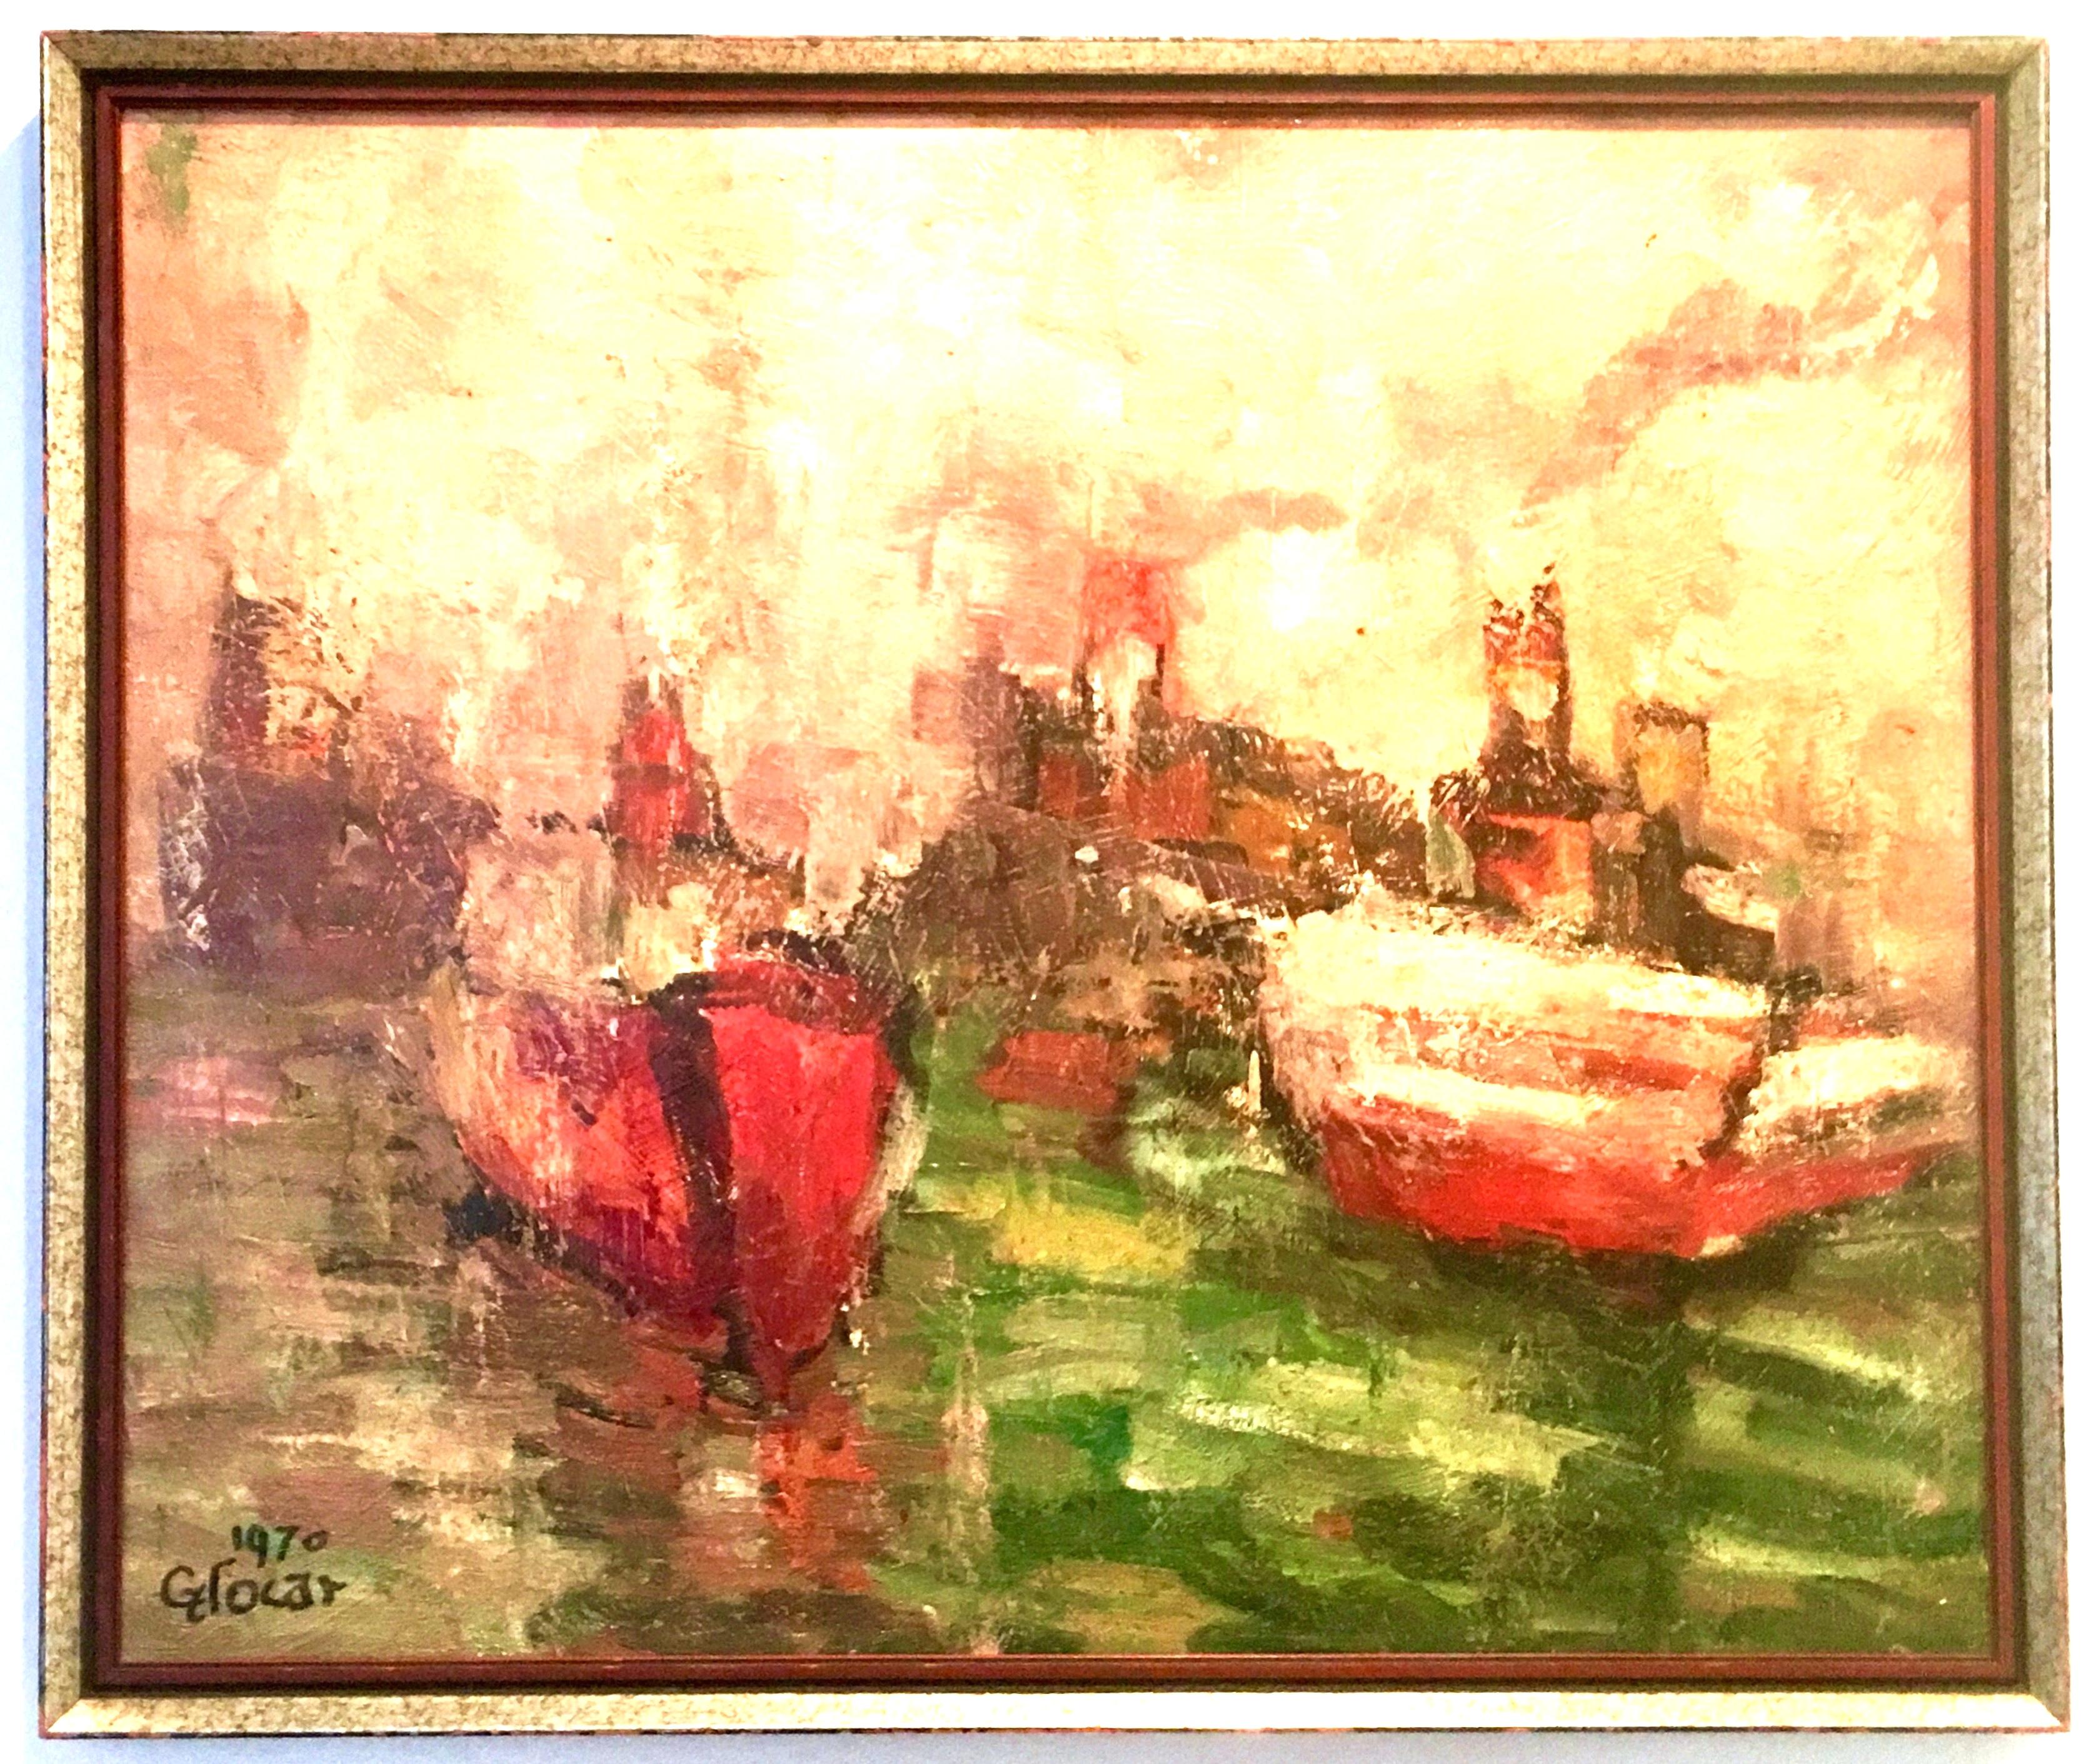 1970 original oil on canvas board abstract painting by, Emilian Glocar. This impasto palette knife technique abstract painting depicts boats on water with cityscape in background scene. Executed in earthy, vibrant pastel color palette. Artist singed